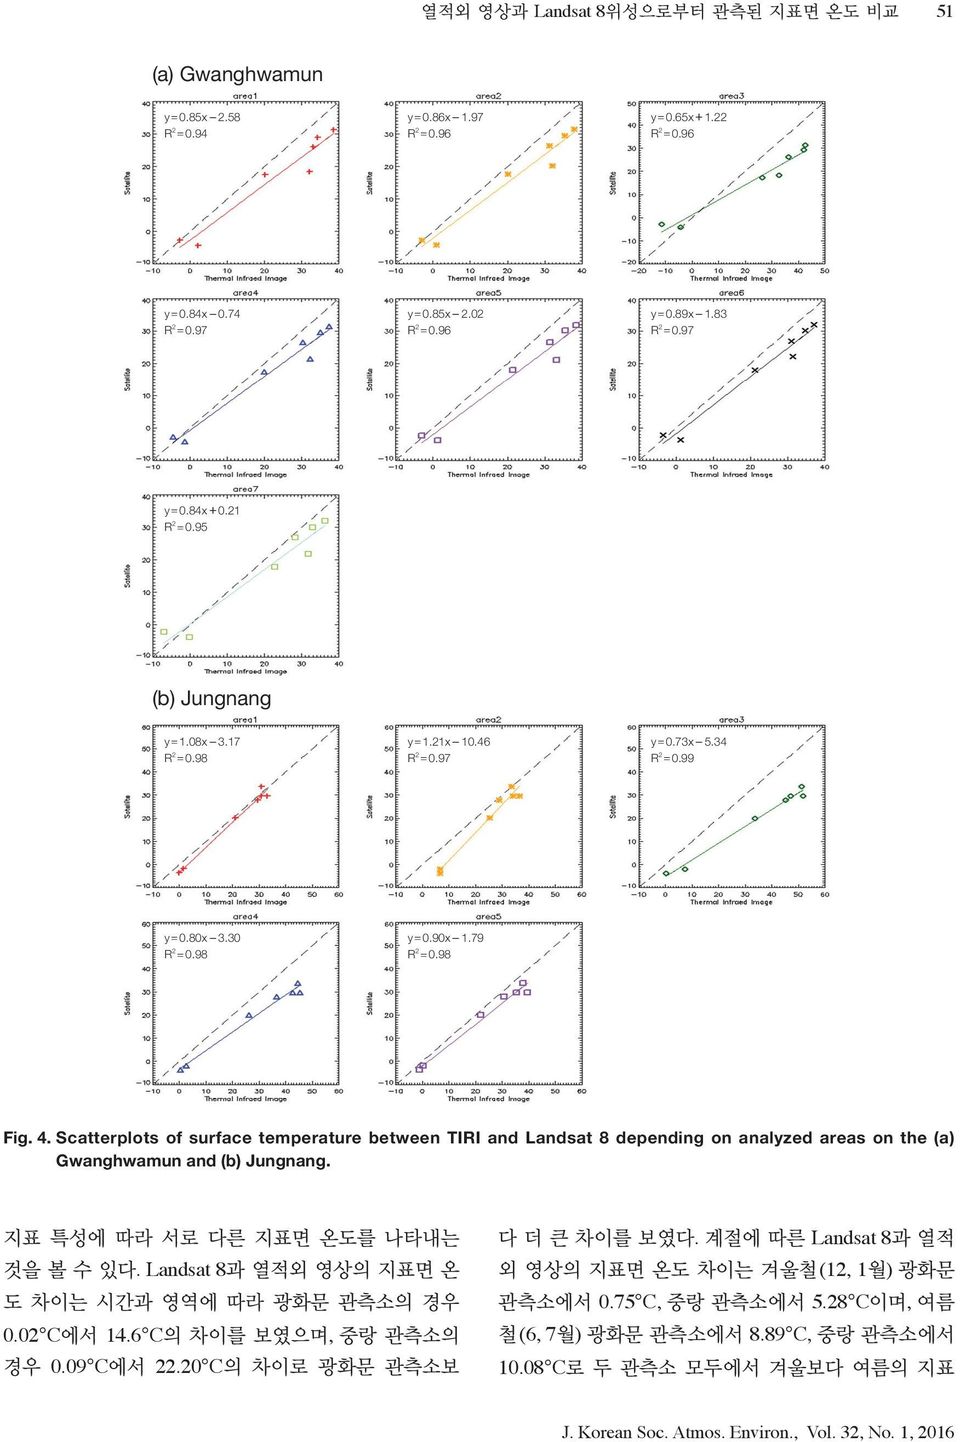 Scatterplots of surface temperature between TIRI and Landsat 8 depending on analyzed areas on the (a) Gwanghwamun and (b) Jungnang. 지표 특성에 따라 서로 다른 지표면 온도를 나타내는 것을 볼 수 있다.